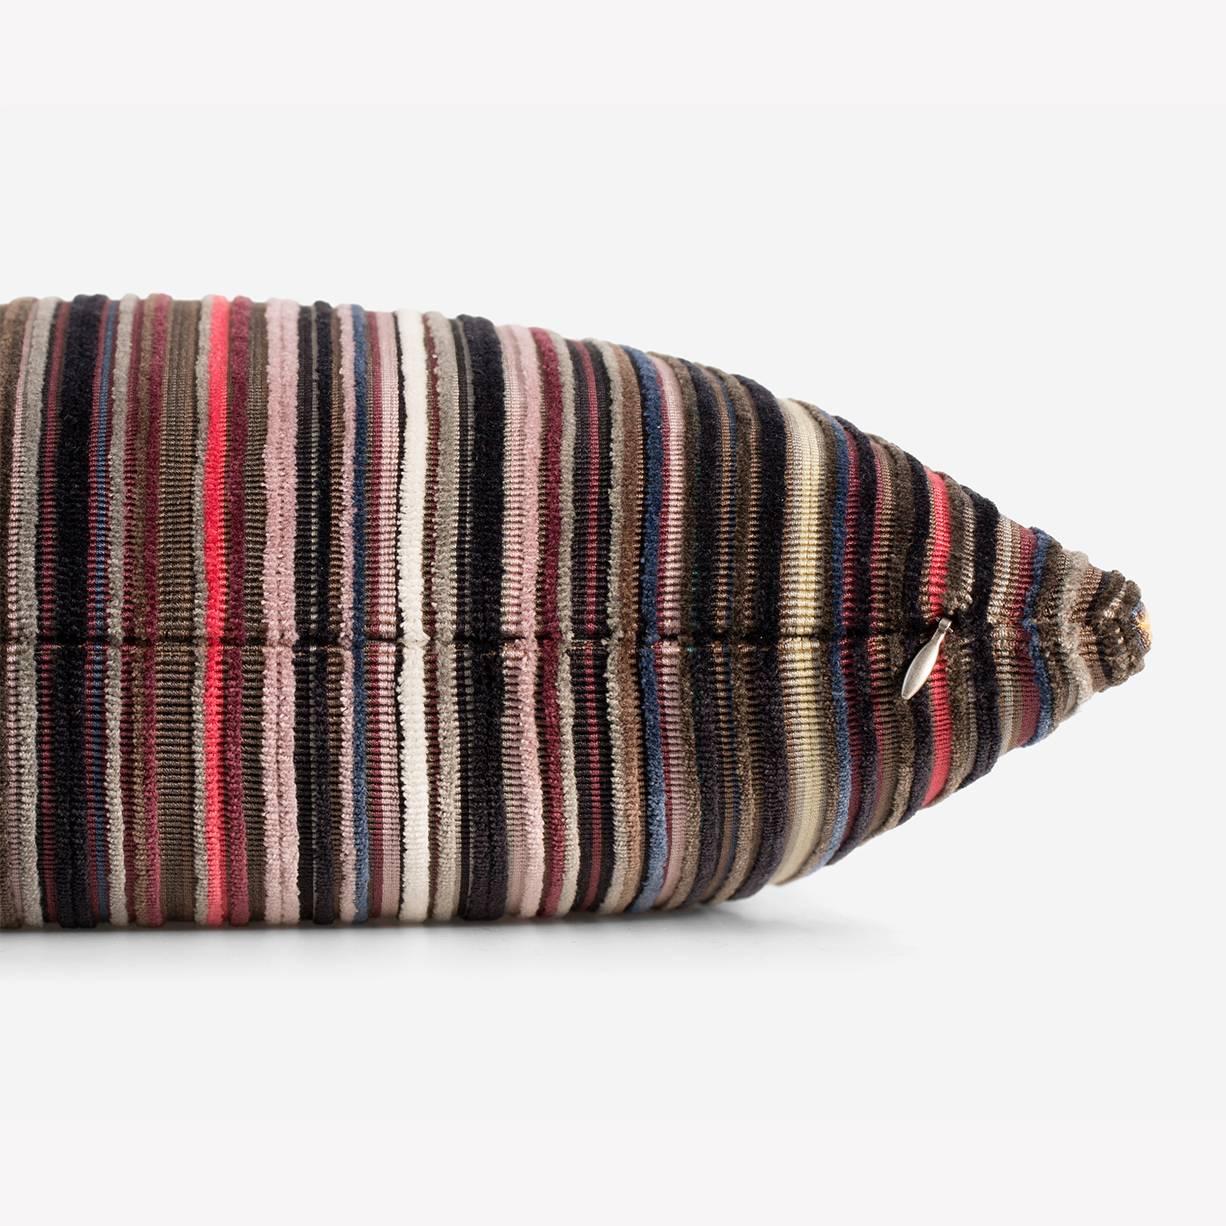 Maharam Pillow
Epingle Stripe by Paul Smith
003 Violet

Epingle Stripe adds dimension to the theme of colorful, planted-warp stripes previously explored by Paul Smith with Maharam. The tiny loops comprising epingle are created through the insertion